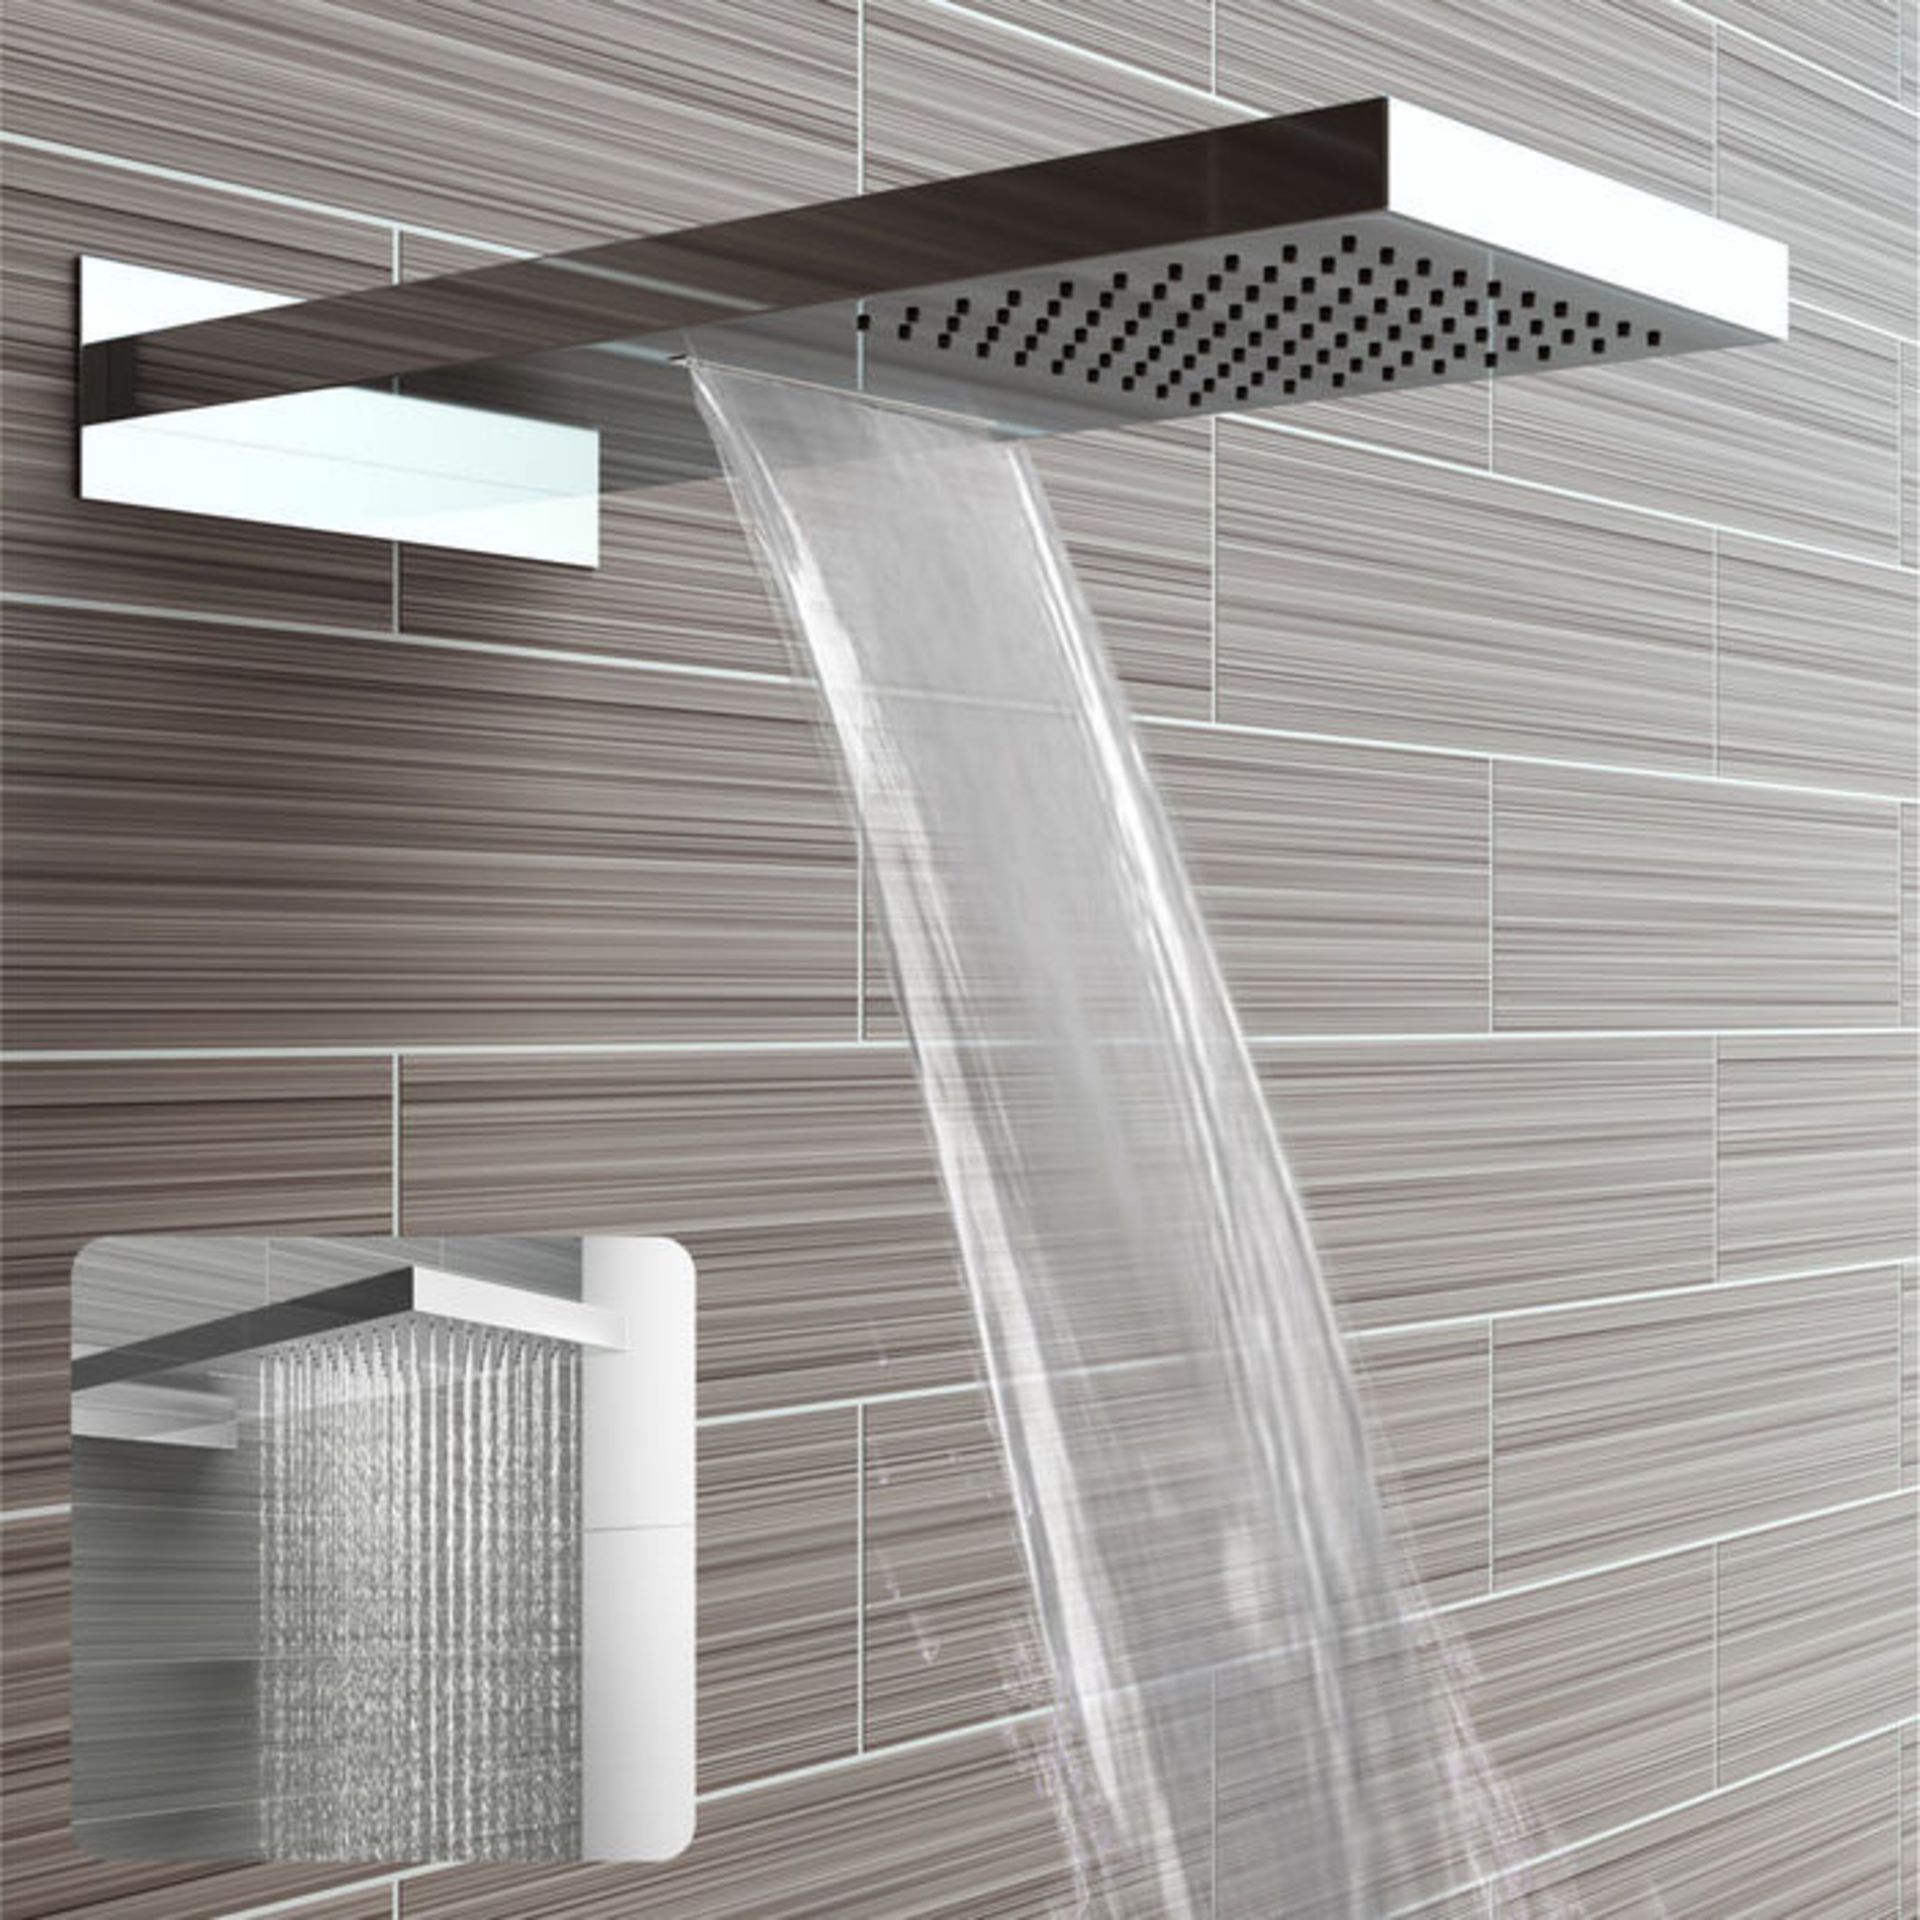 (TP105) Stainless Steel 230x500mm Waterfall Shower Head. RRP £374.99. Dual function waterfall and - Image 3 of 6